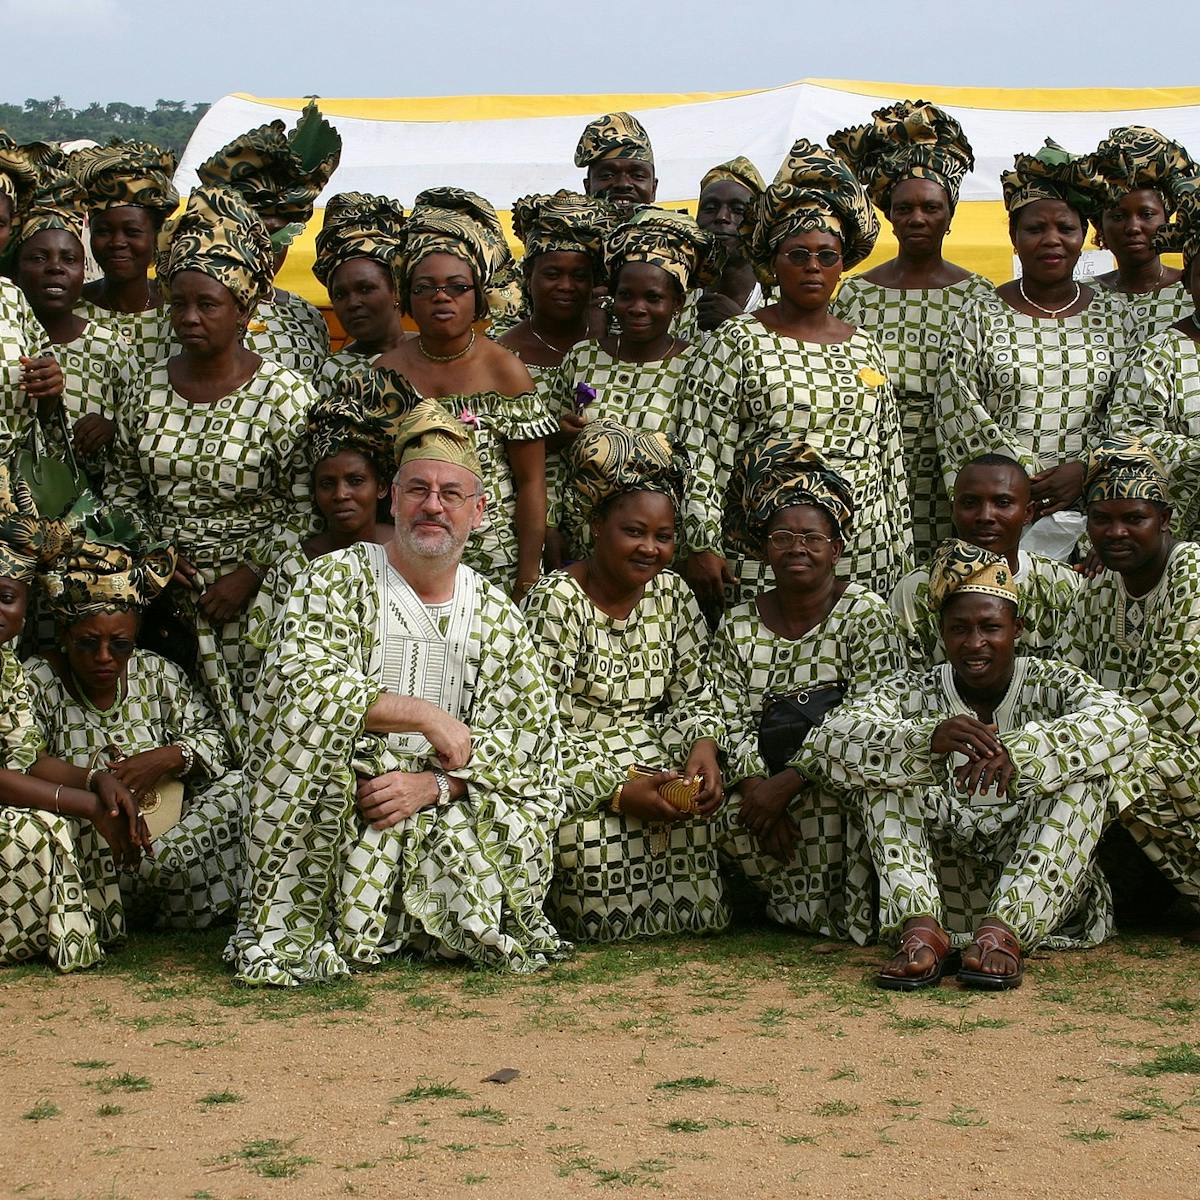 Nigeria S Tradition Of Matching Outfits At Events Has A Downside